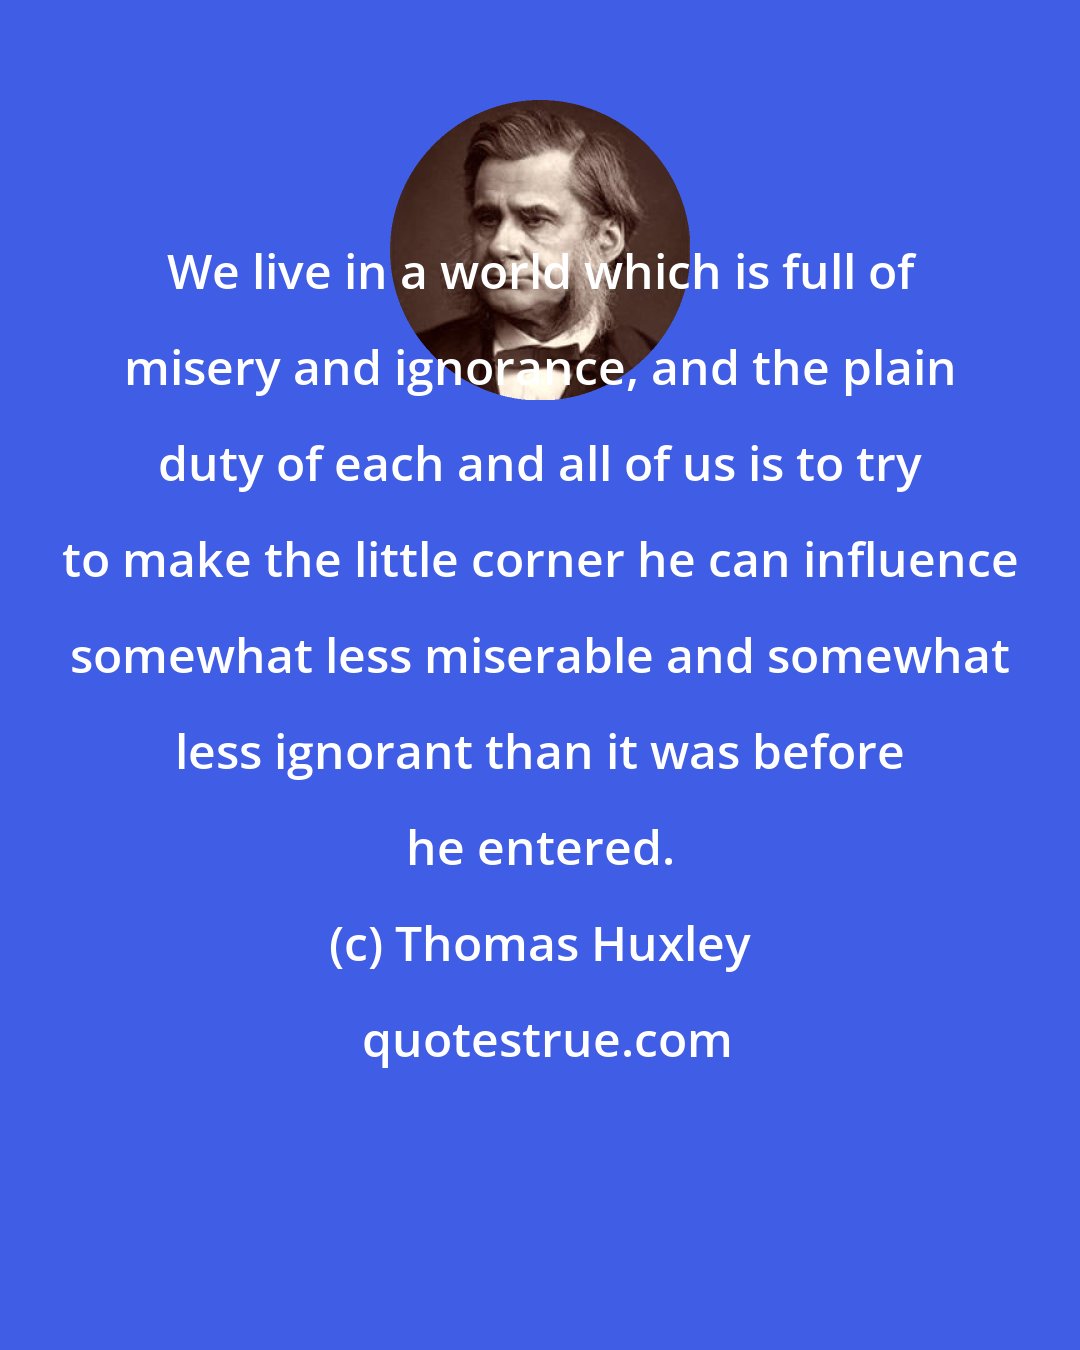 Thomas Huxley: We live in a world which is full of misery and ignorance, and the plain duty of each and all of us is to try to make the little corner he can influence somewhat less miserable and somewhat less ignorant than it was before he entered.